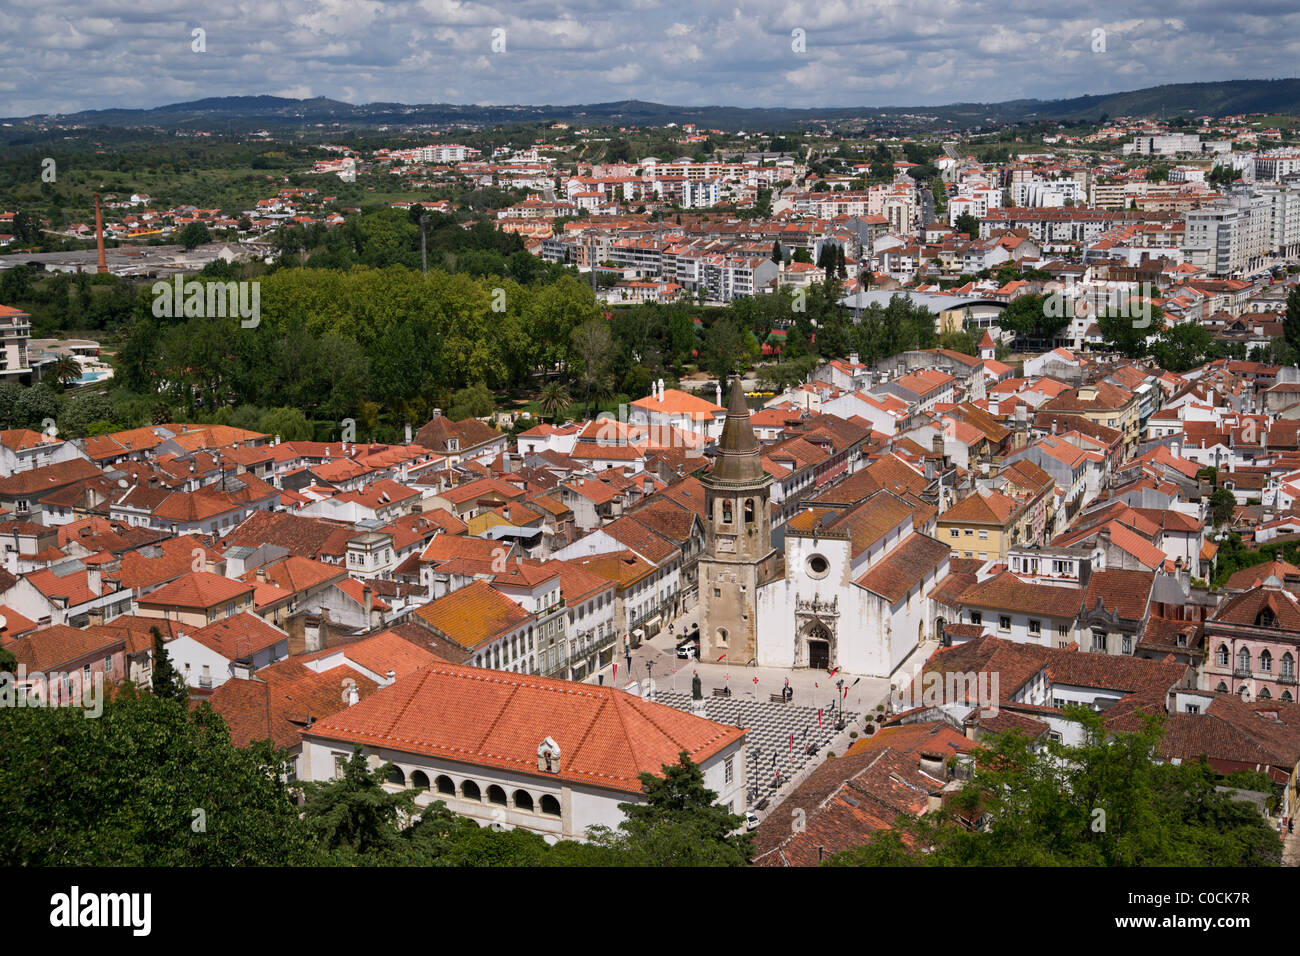 Old part of Tomar, Portugal Stock Photo